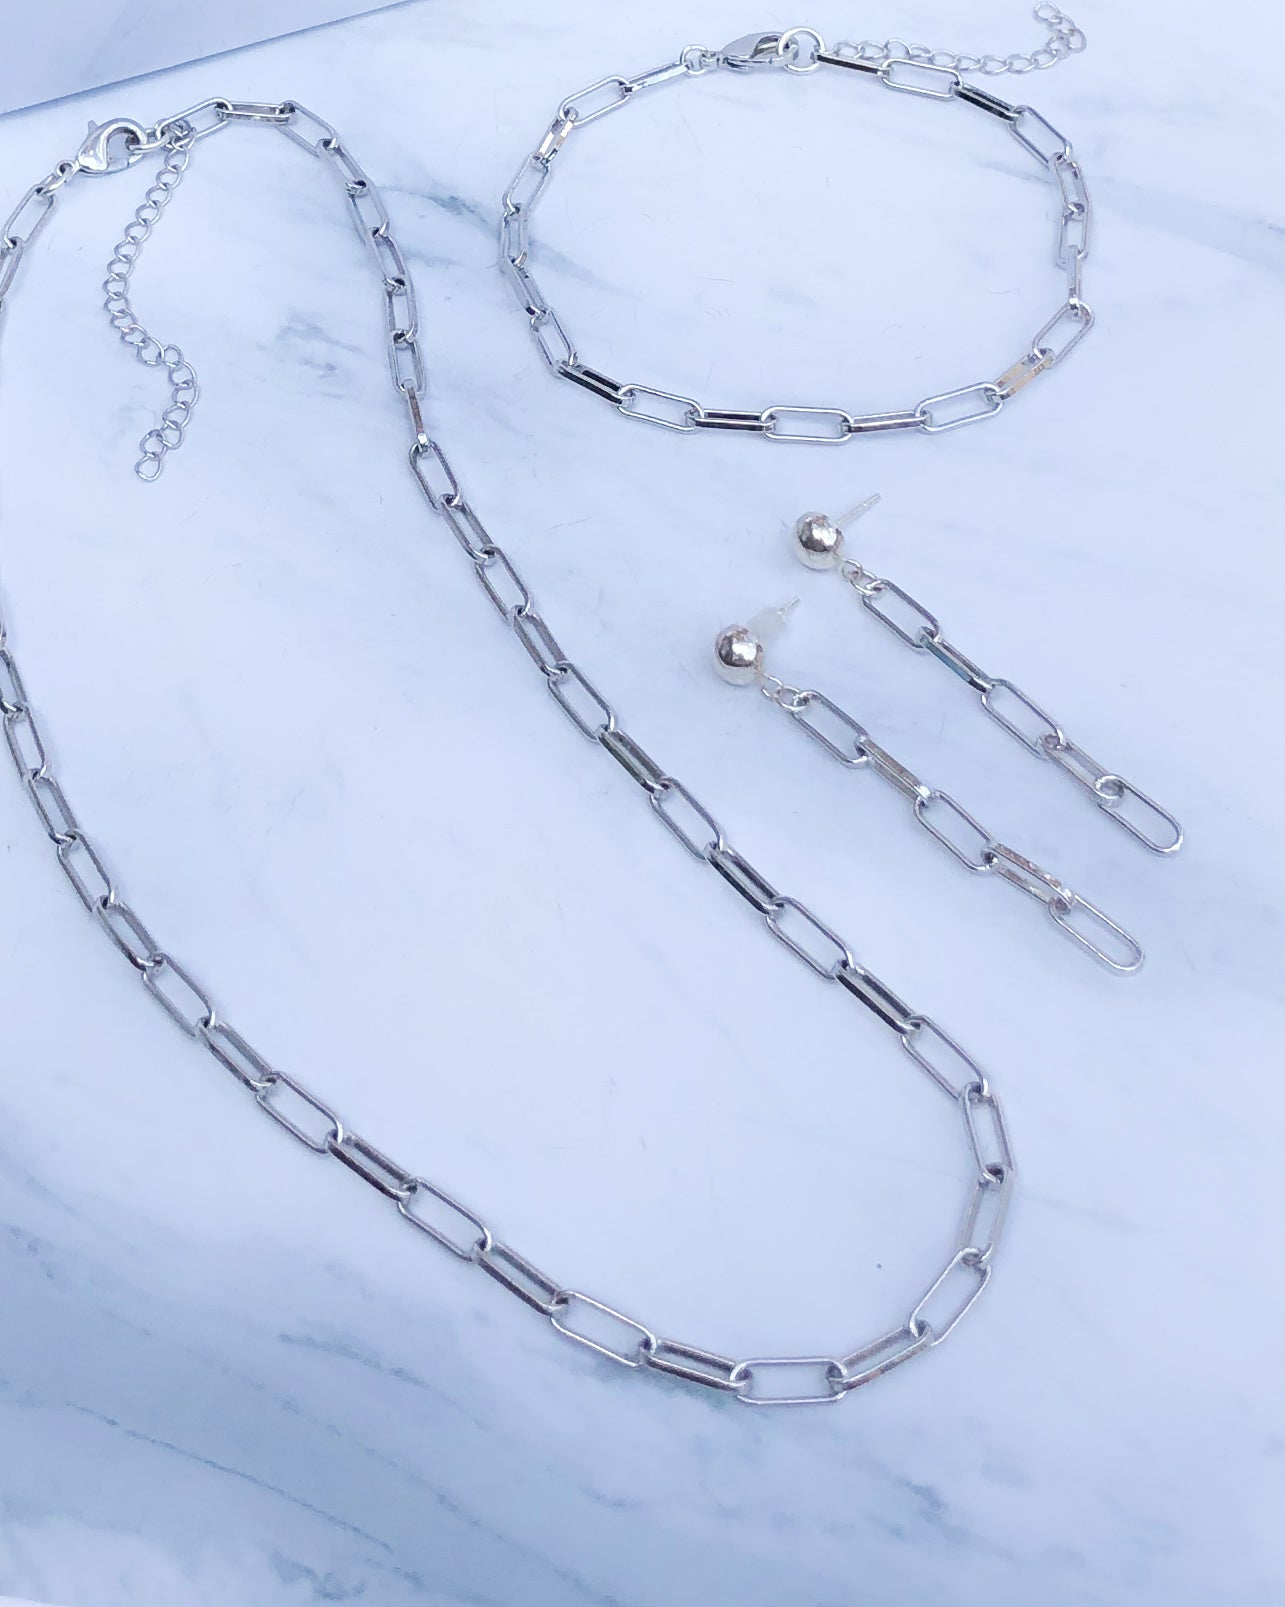 Paperclip Necklace Set in White Gold Filled Chain. Set Includes Necklace, Bracelet, and Earrings